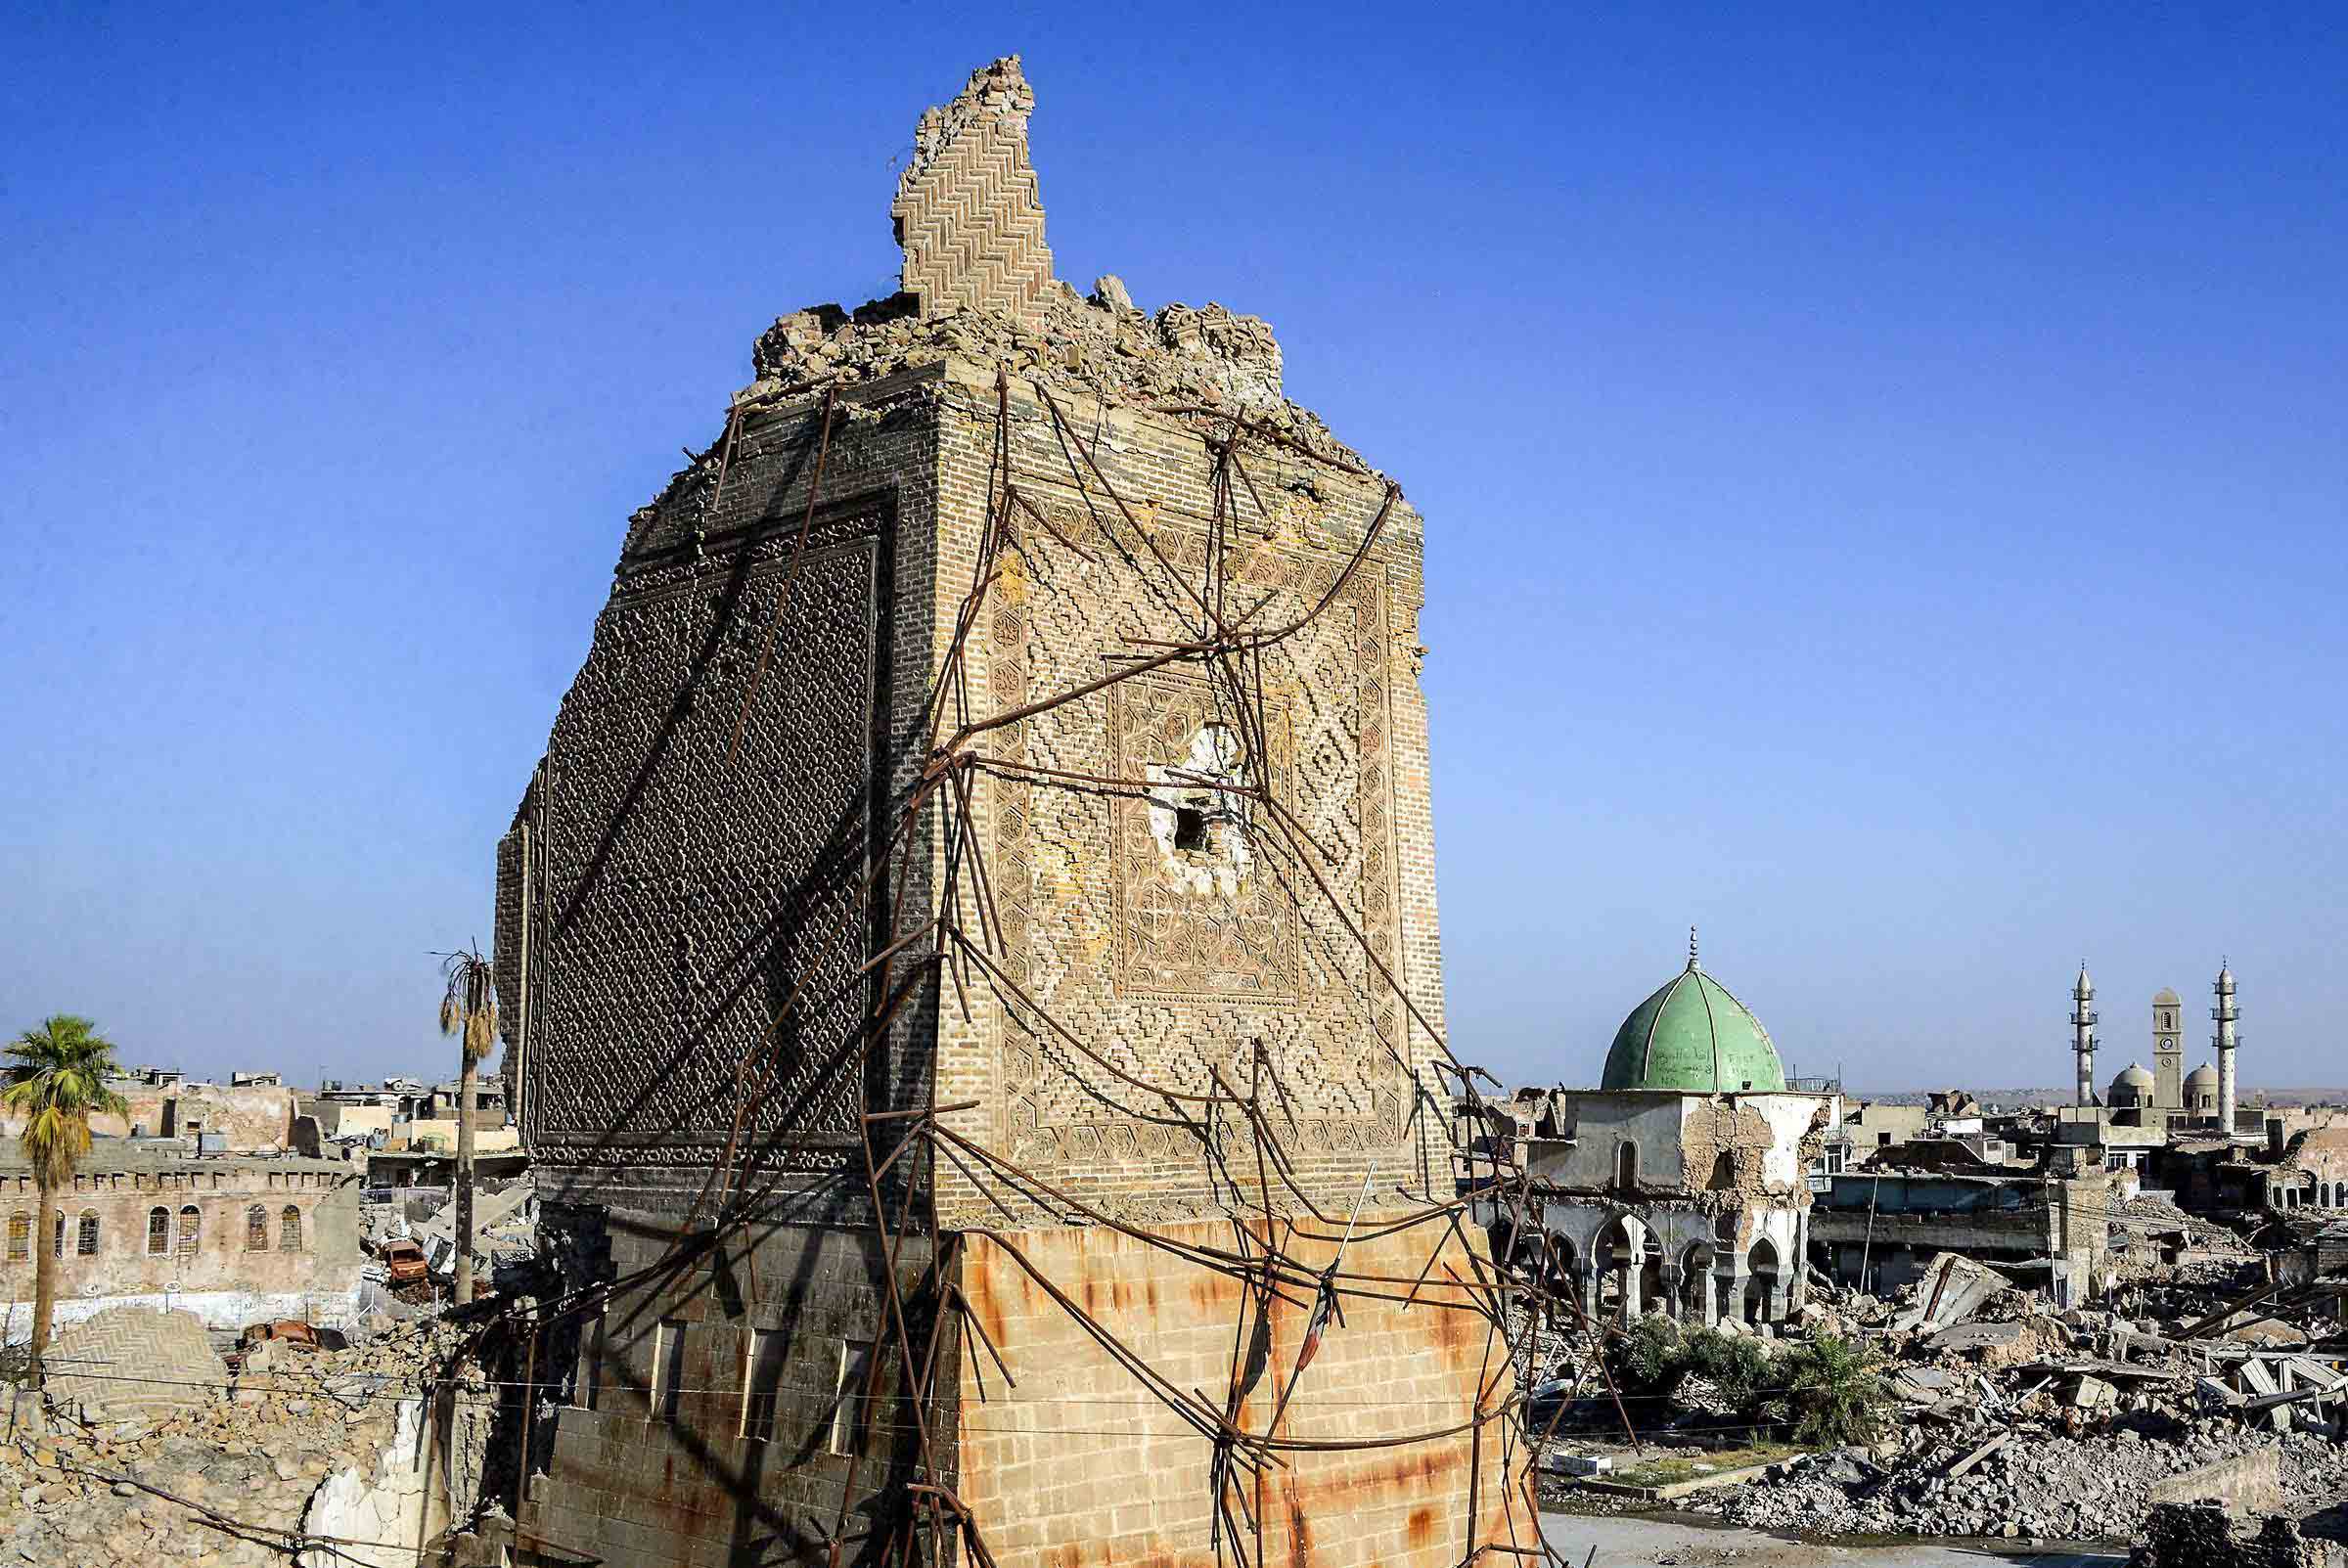 All that is left of the minaret is part of its rectangular base, the rest of it sheared off by fighting